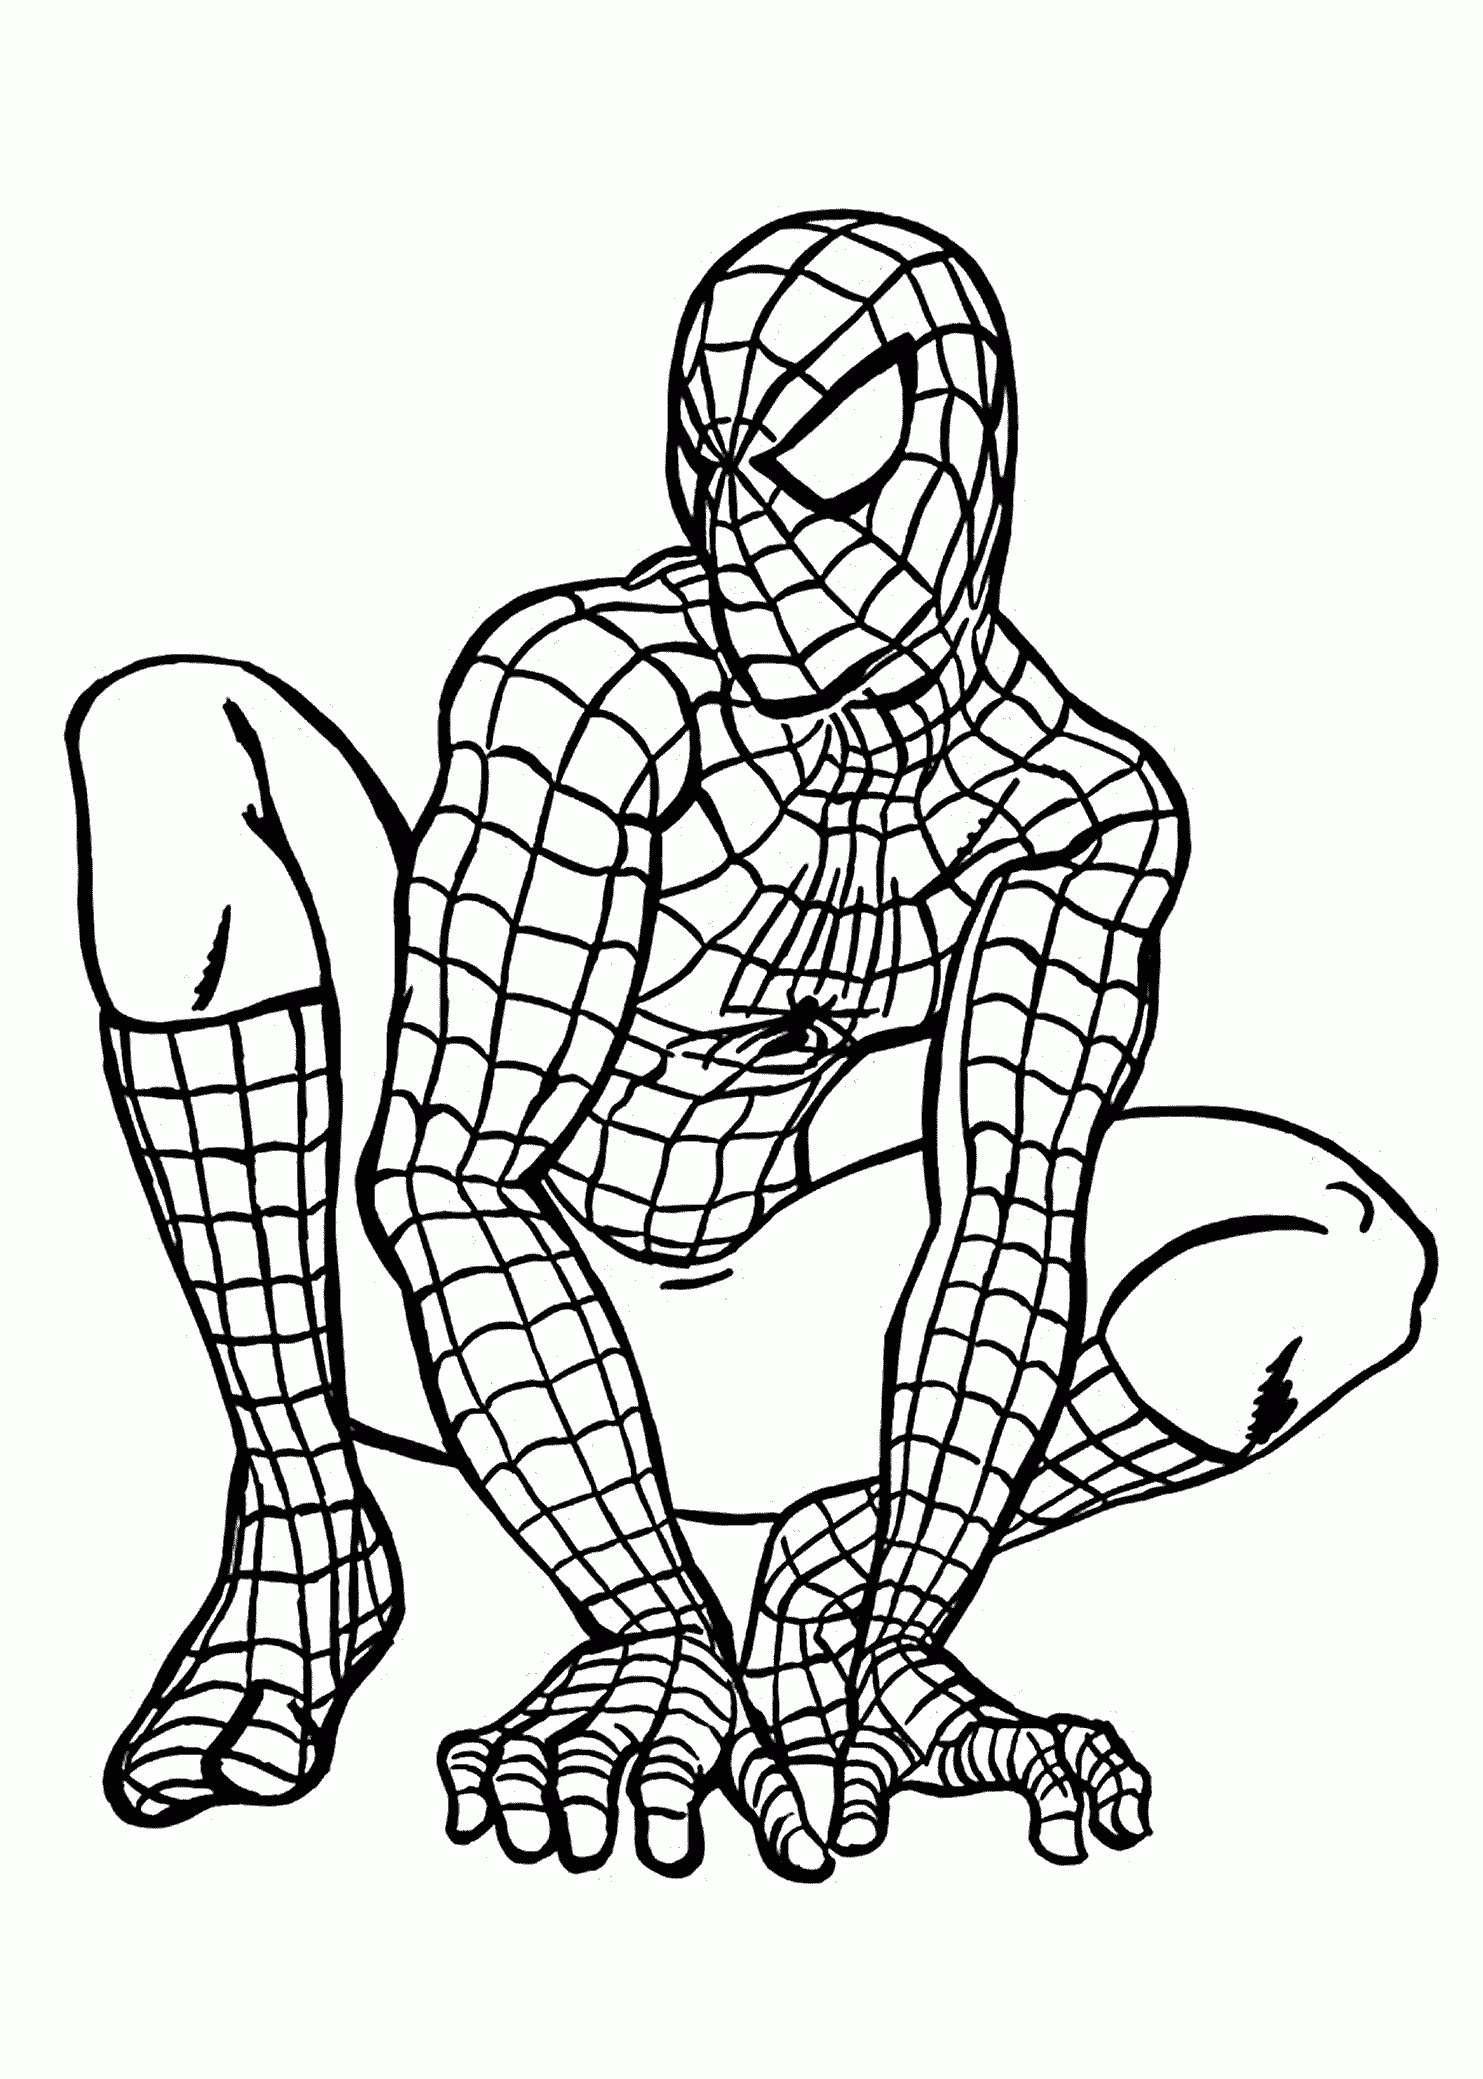 Spider Man Homecoming Coloring Pages Free Printable Spiderman - Free Printable Spiderman Pictures